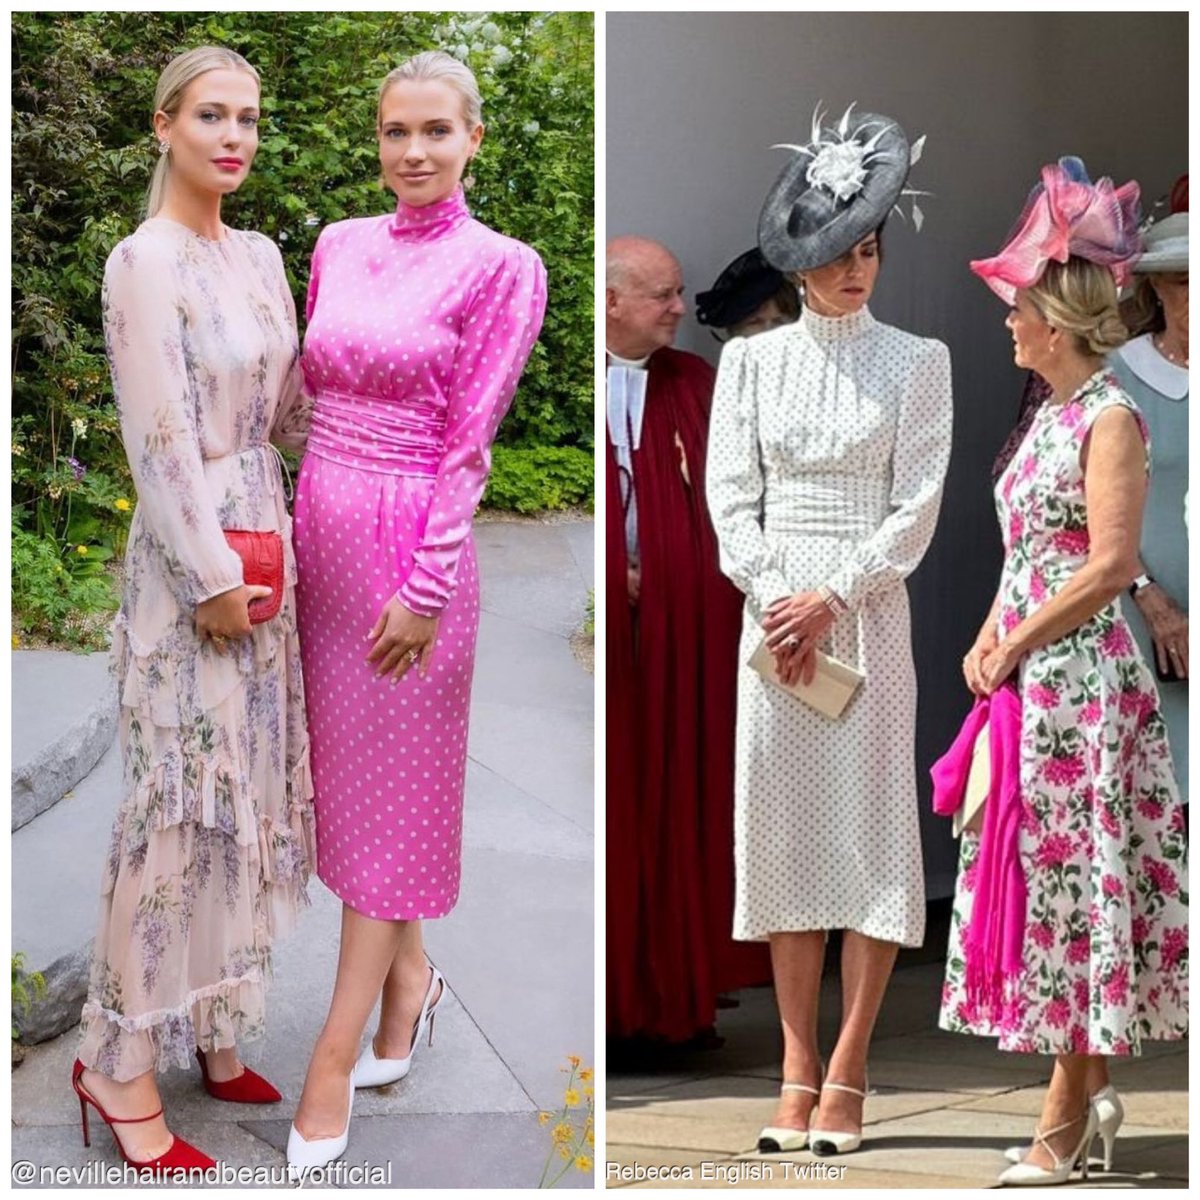 The Princess of Wales (Order of the Garter) and Eliza Spencer (Chelsea Flower Show) wearing the same Alessandra Rich dress in different colors. bit.ly/443lpNe